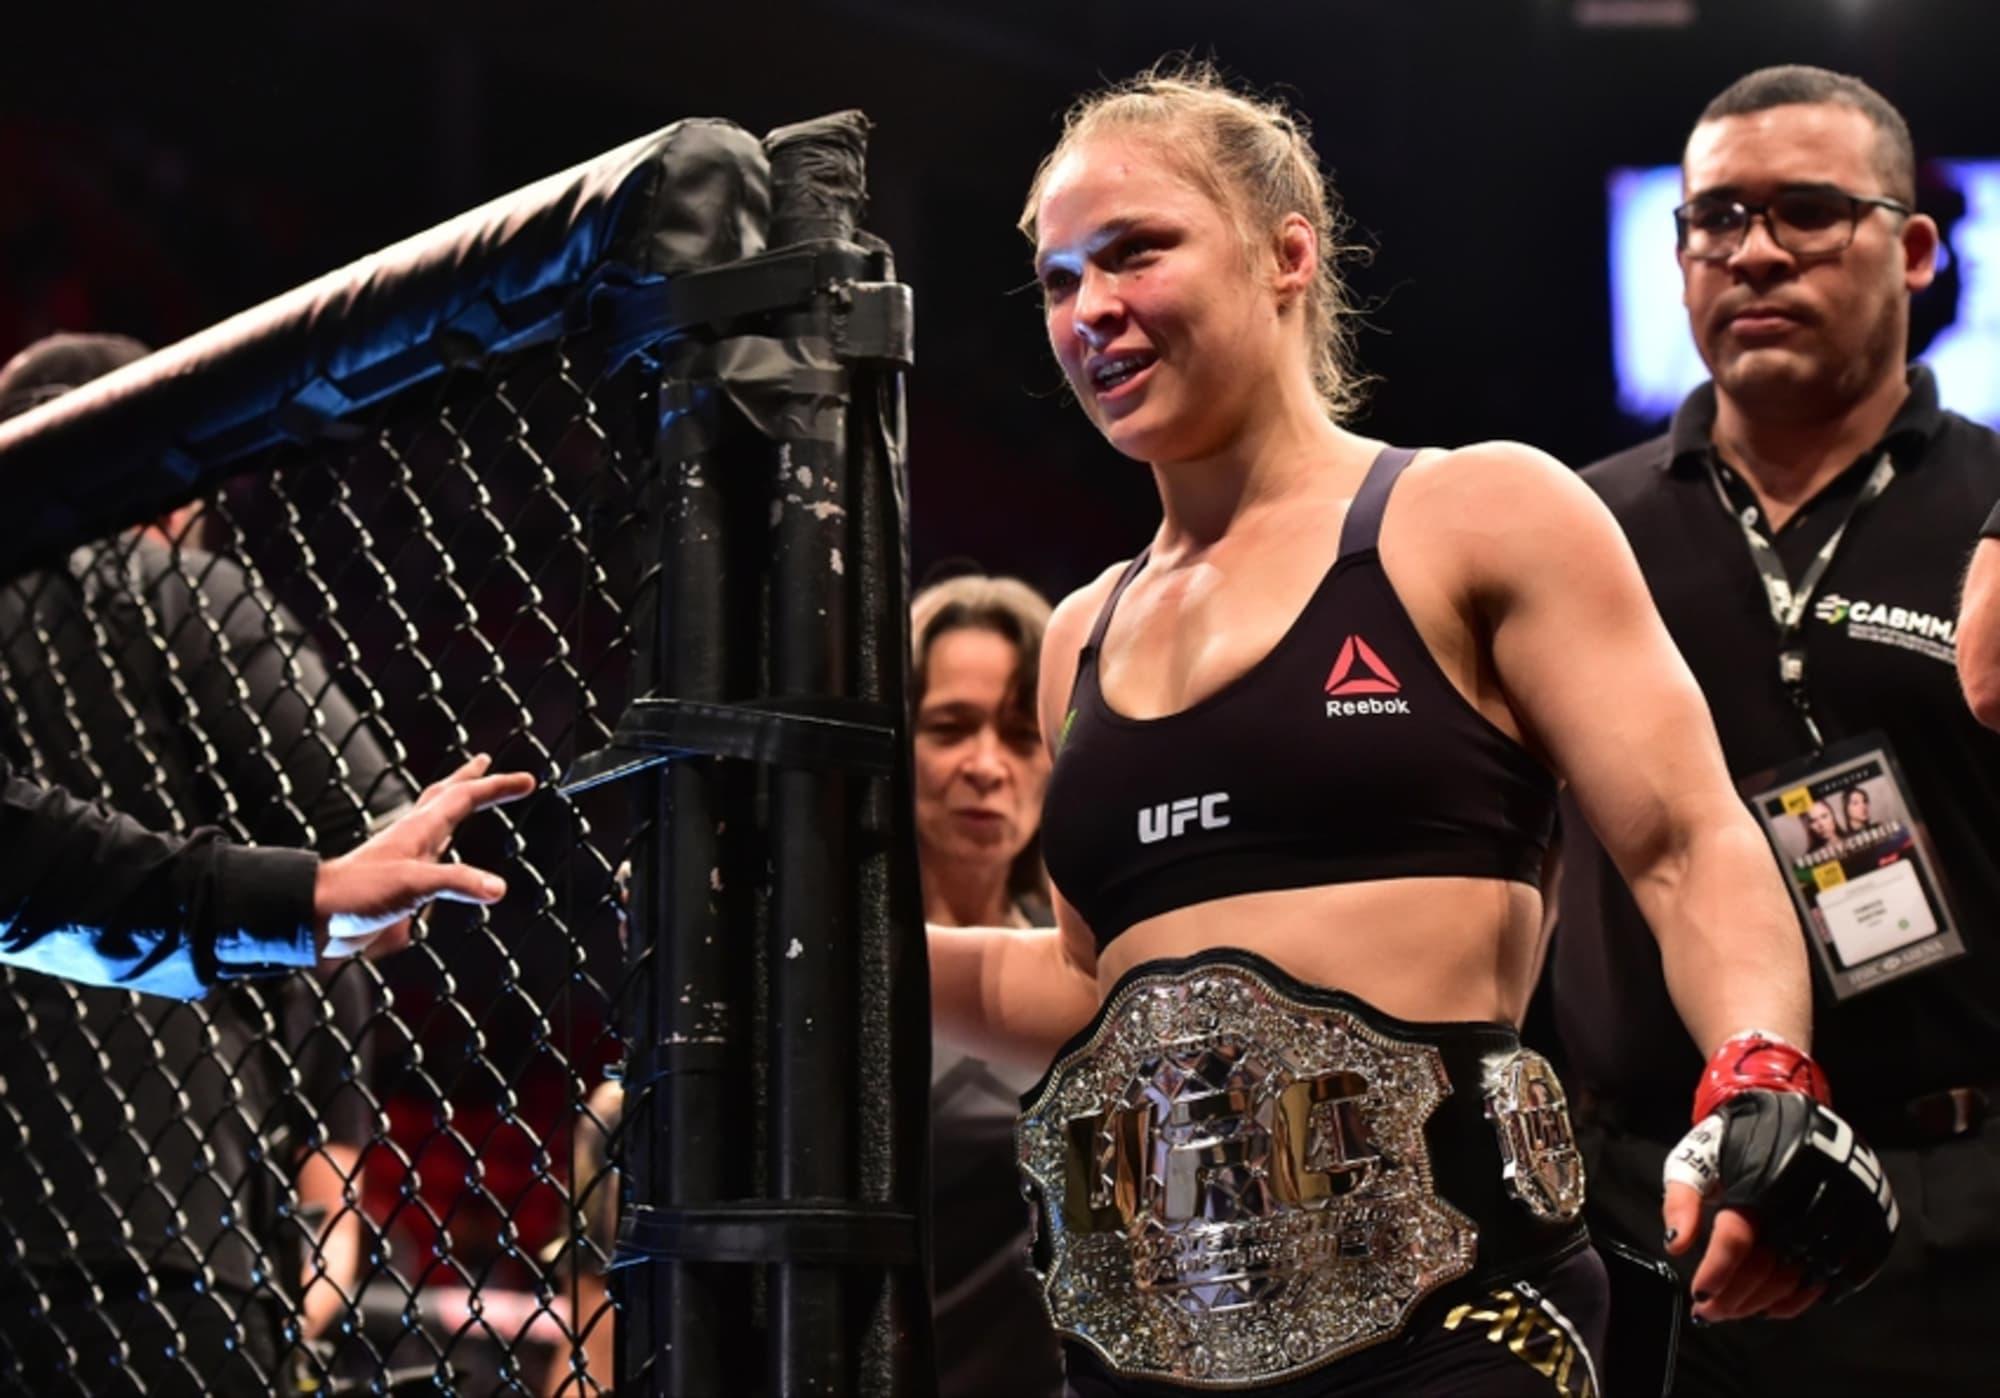 Ronda Rousey with her UFC Women's Bantamweight title. Credit: FanSided.